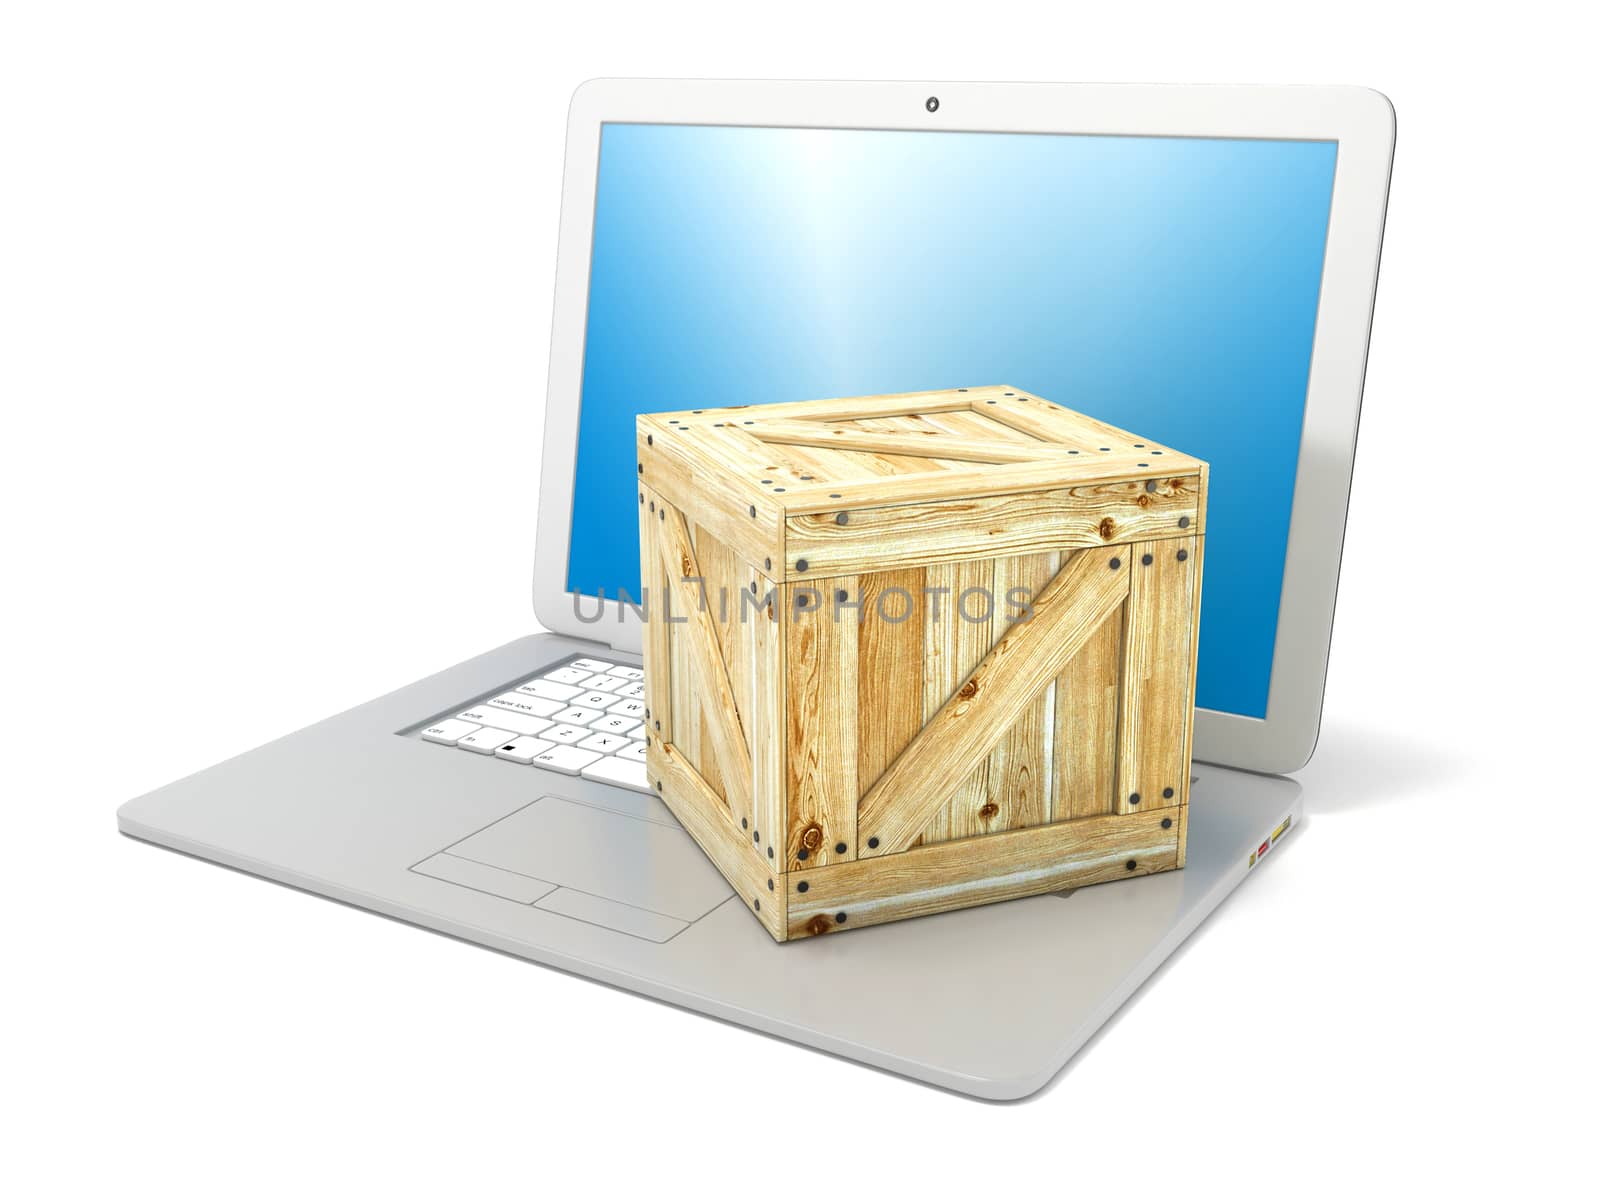 Laptop with wooden box package. Concept of online ordering of pr by djmilic